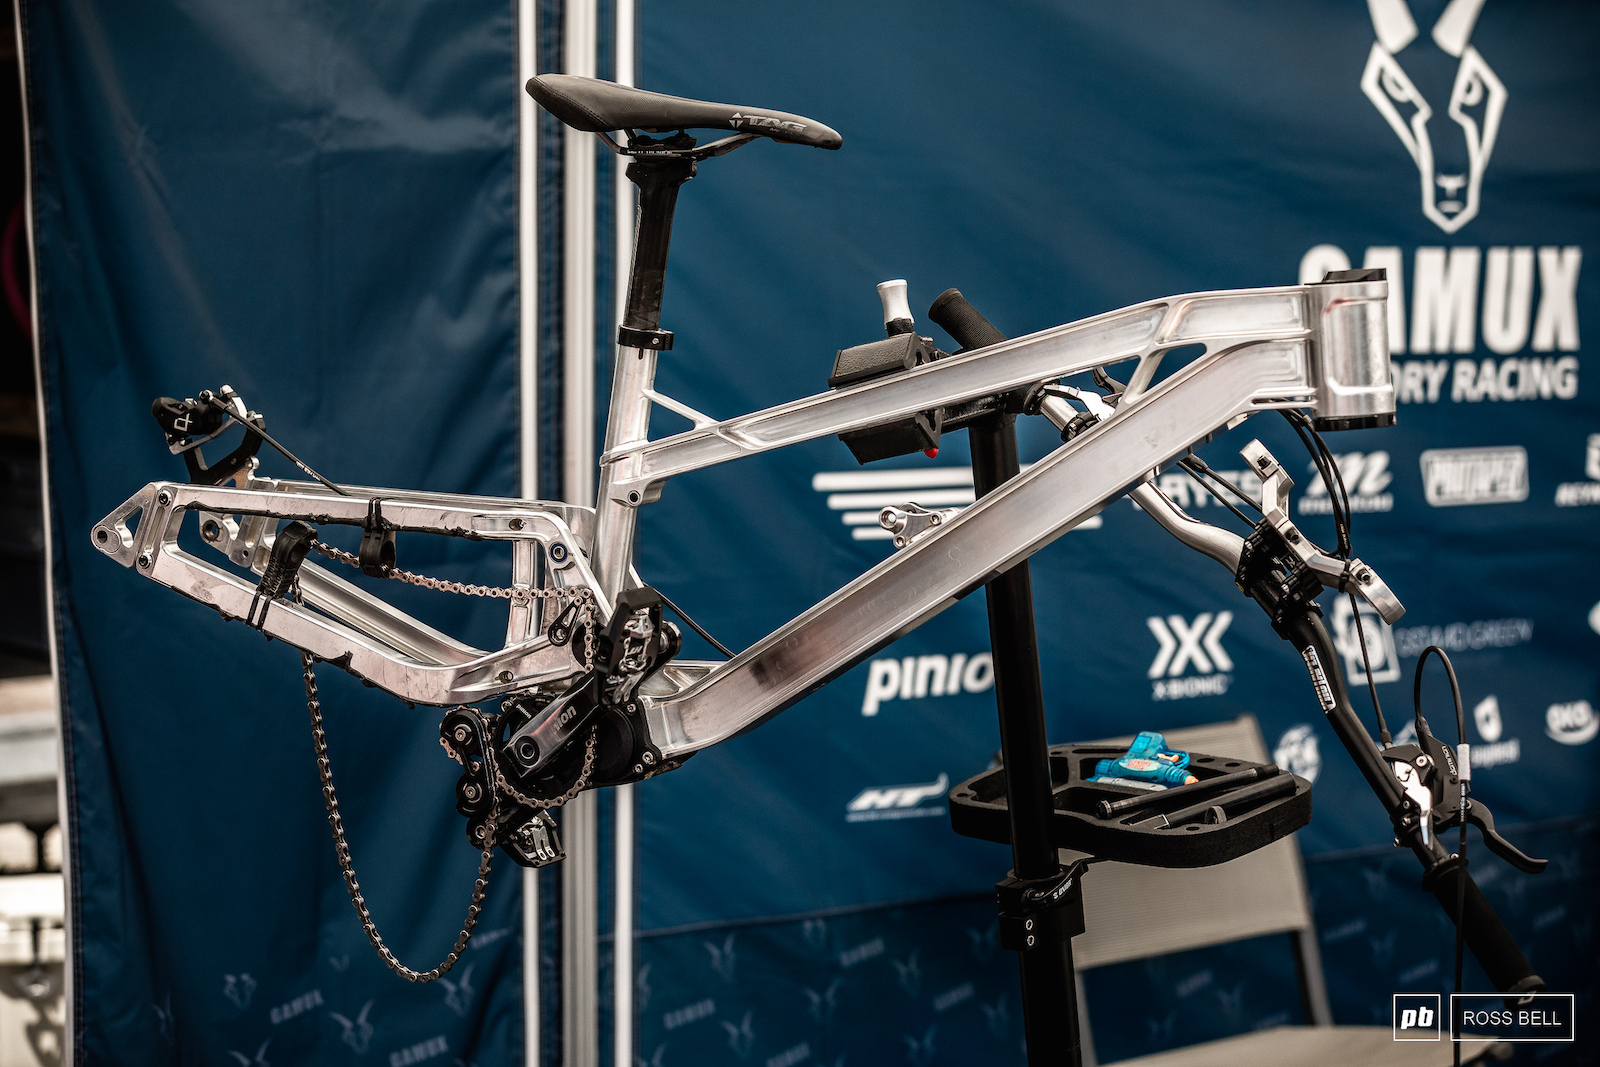 The Gamux downhill bike really stands out in the World Cup pits.